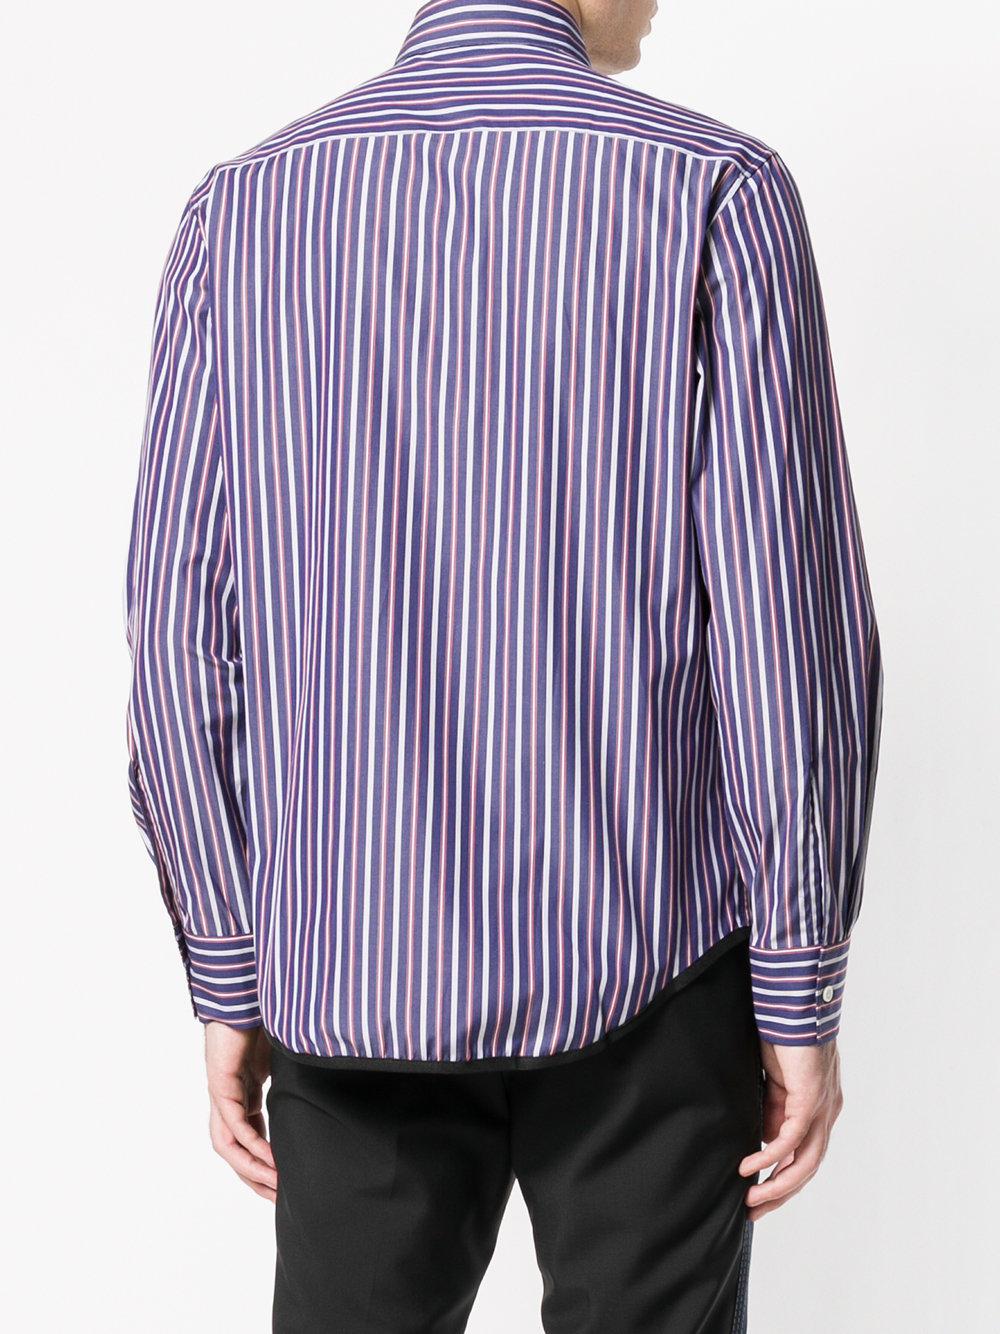 Lanvin Striped Print Shirt in Blue for Men - Save 52% - Lyst